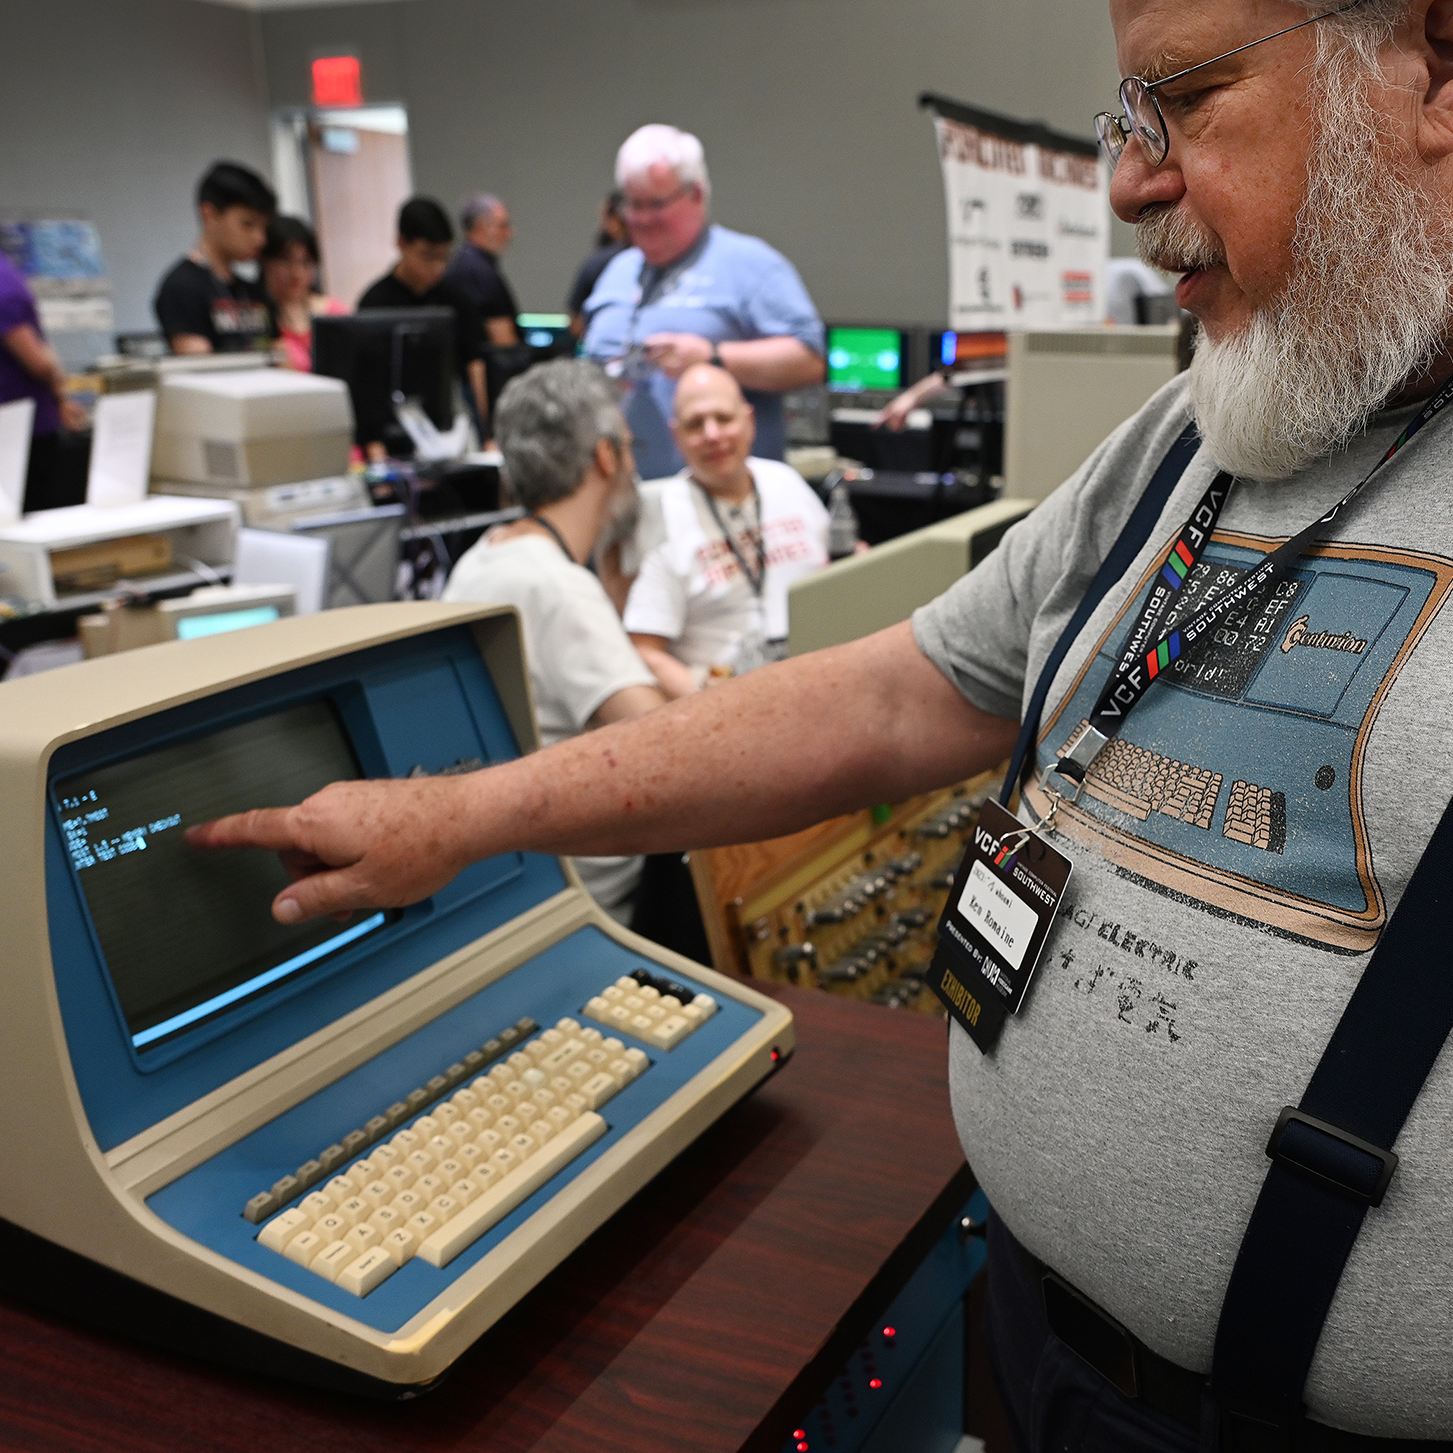 Former computer engineer Ken Romaine looks over a Centurion Computer that he helped design and build in the 1970s.